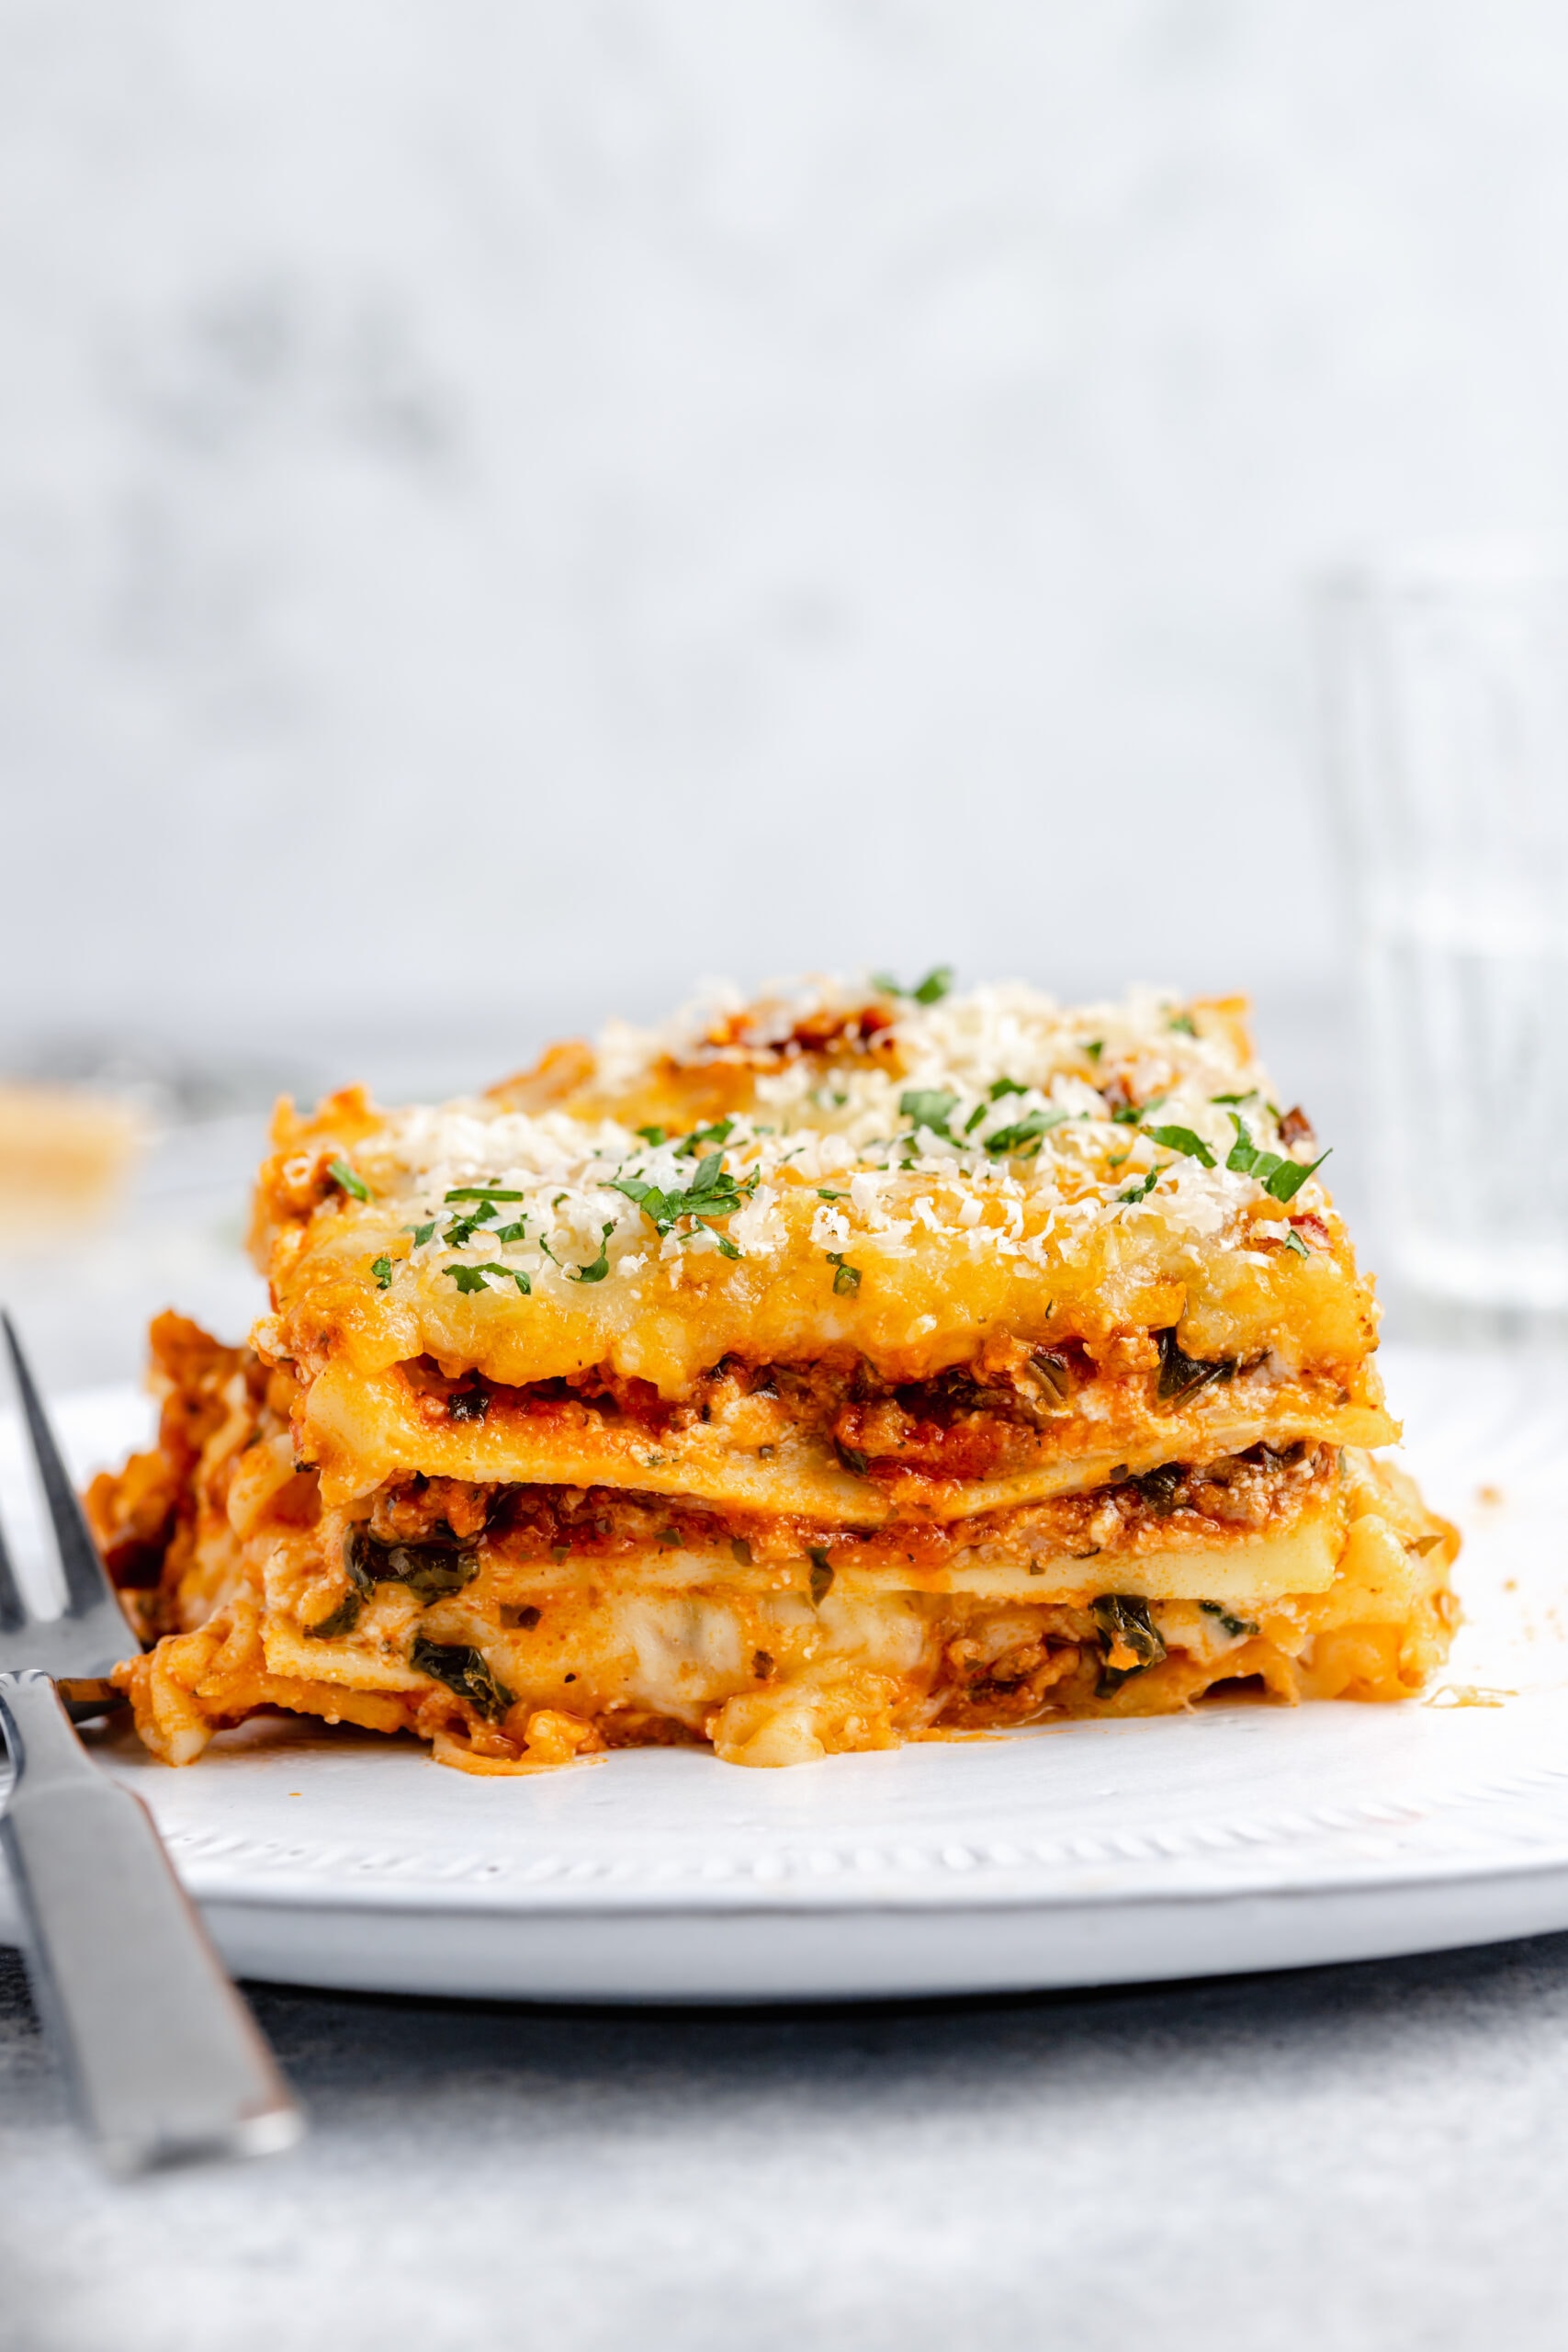 Easy Homemade Lasagna - All the Healthy Things